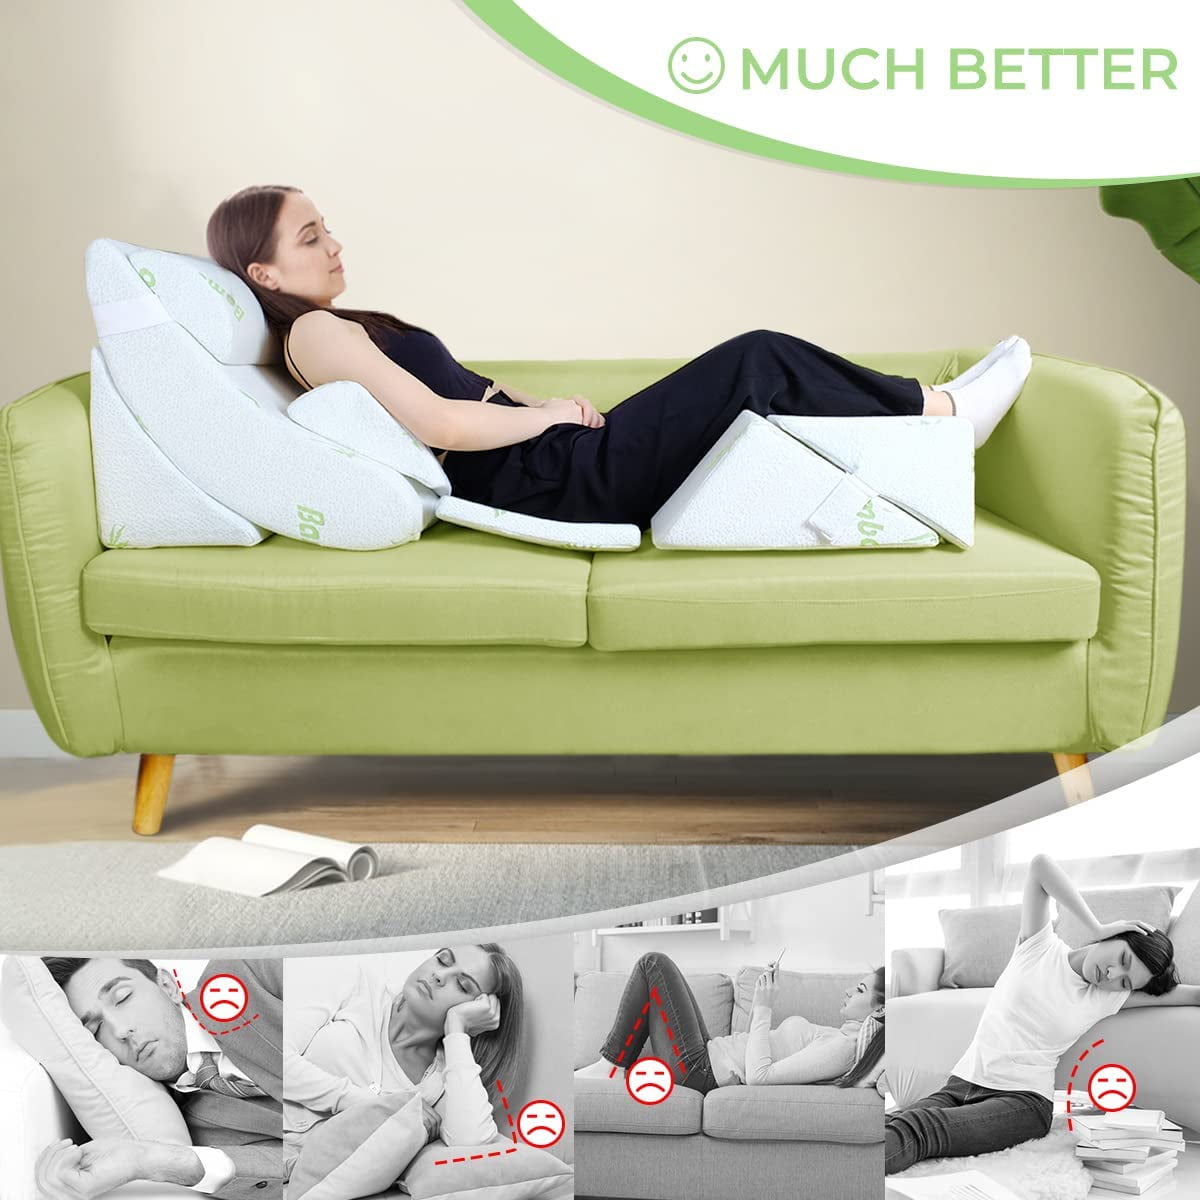 Bed Wedge Pillow Set 7PCS, Premium Foam Orthopaedic Wedge Pillow for Back  Neck Leg Pain Relief - Adjustable  Comfortable Wedge Pillows - Great for  Sleeping, Reading, Rest Elevation, FACESOFT - Walmart.com